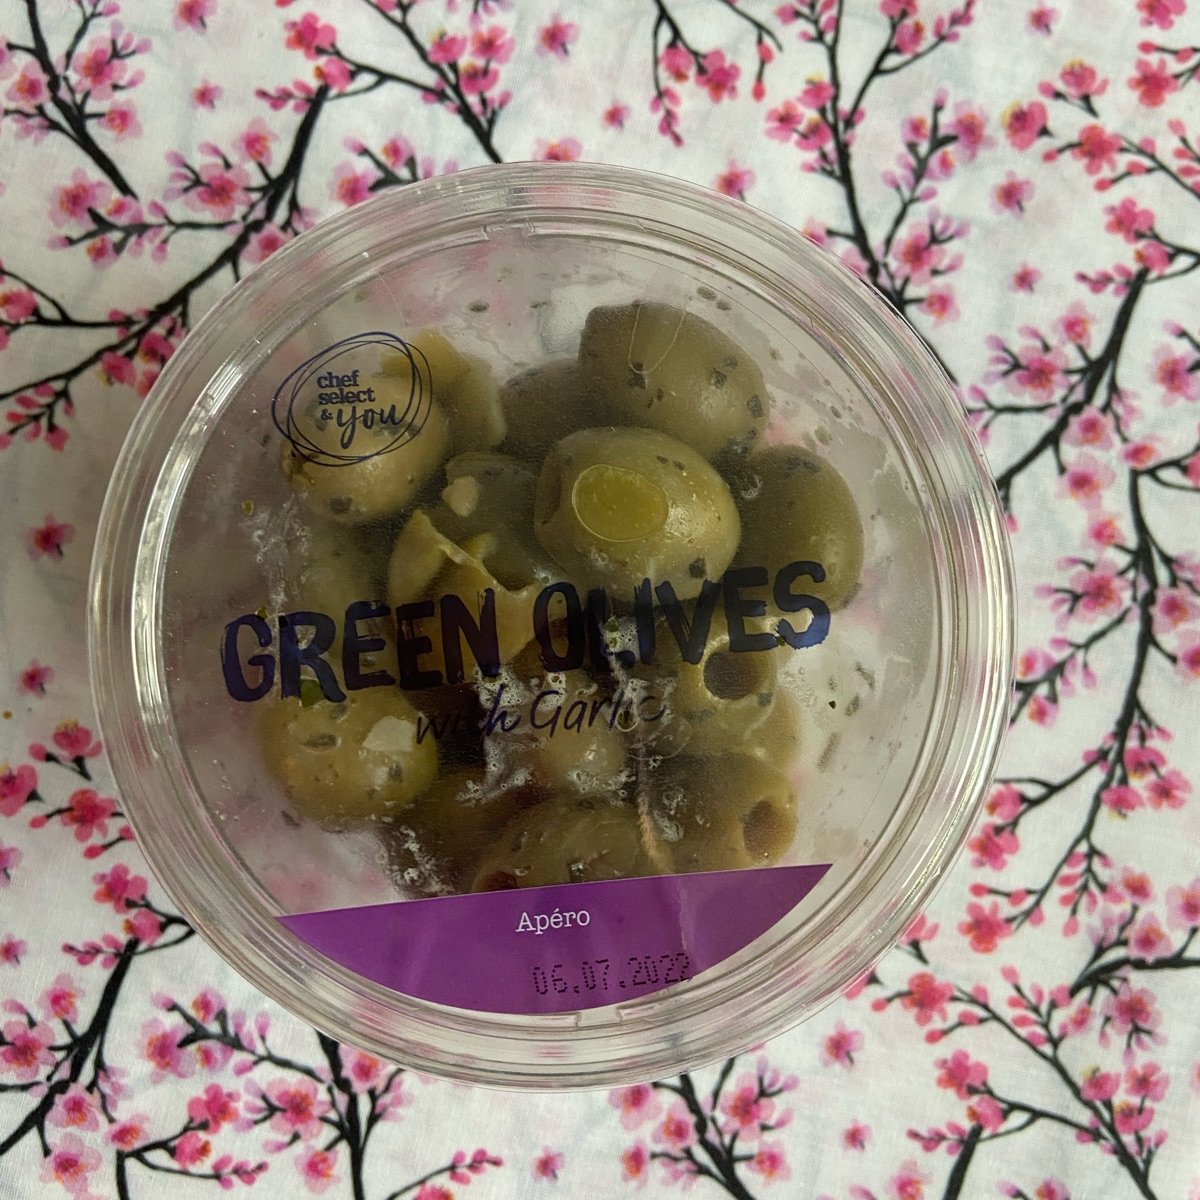 Chef select and you green olives with garlic Review | abillion